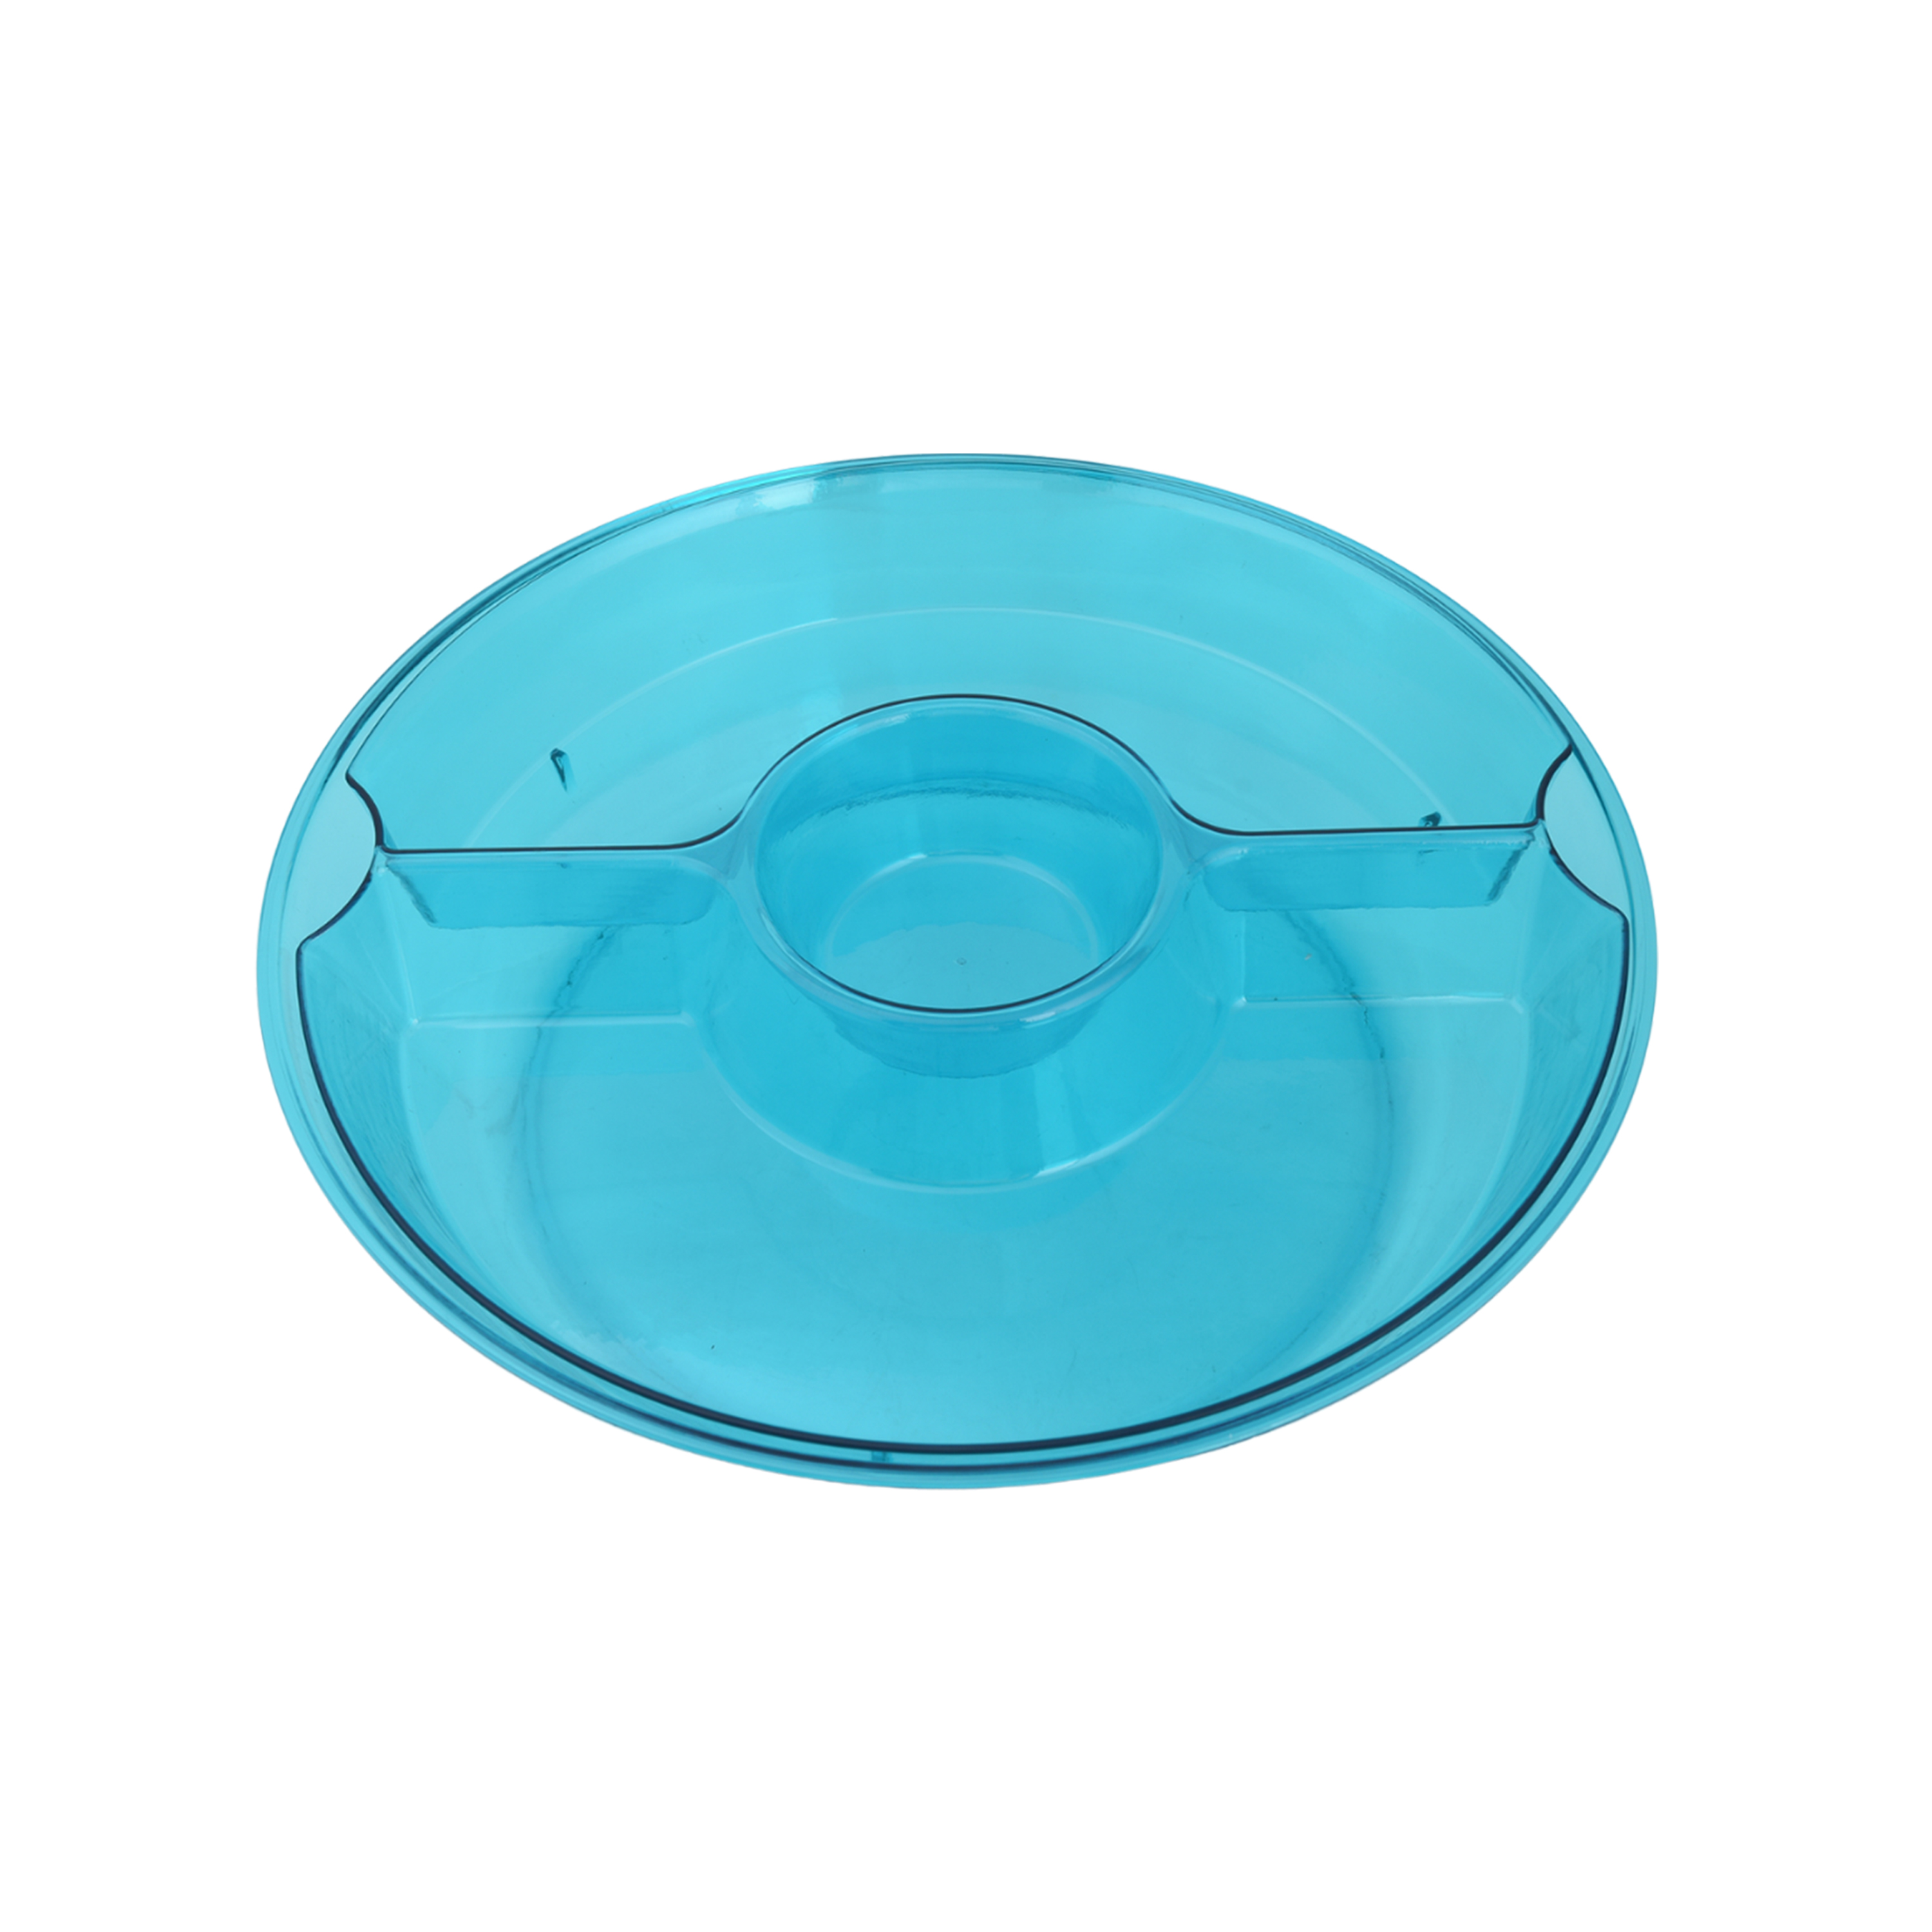 Mainstays Acrylic Appetizer On Ice Serving Tray with Lid, Blue - image 1 of 8